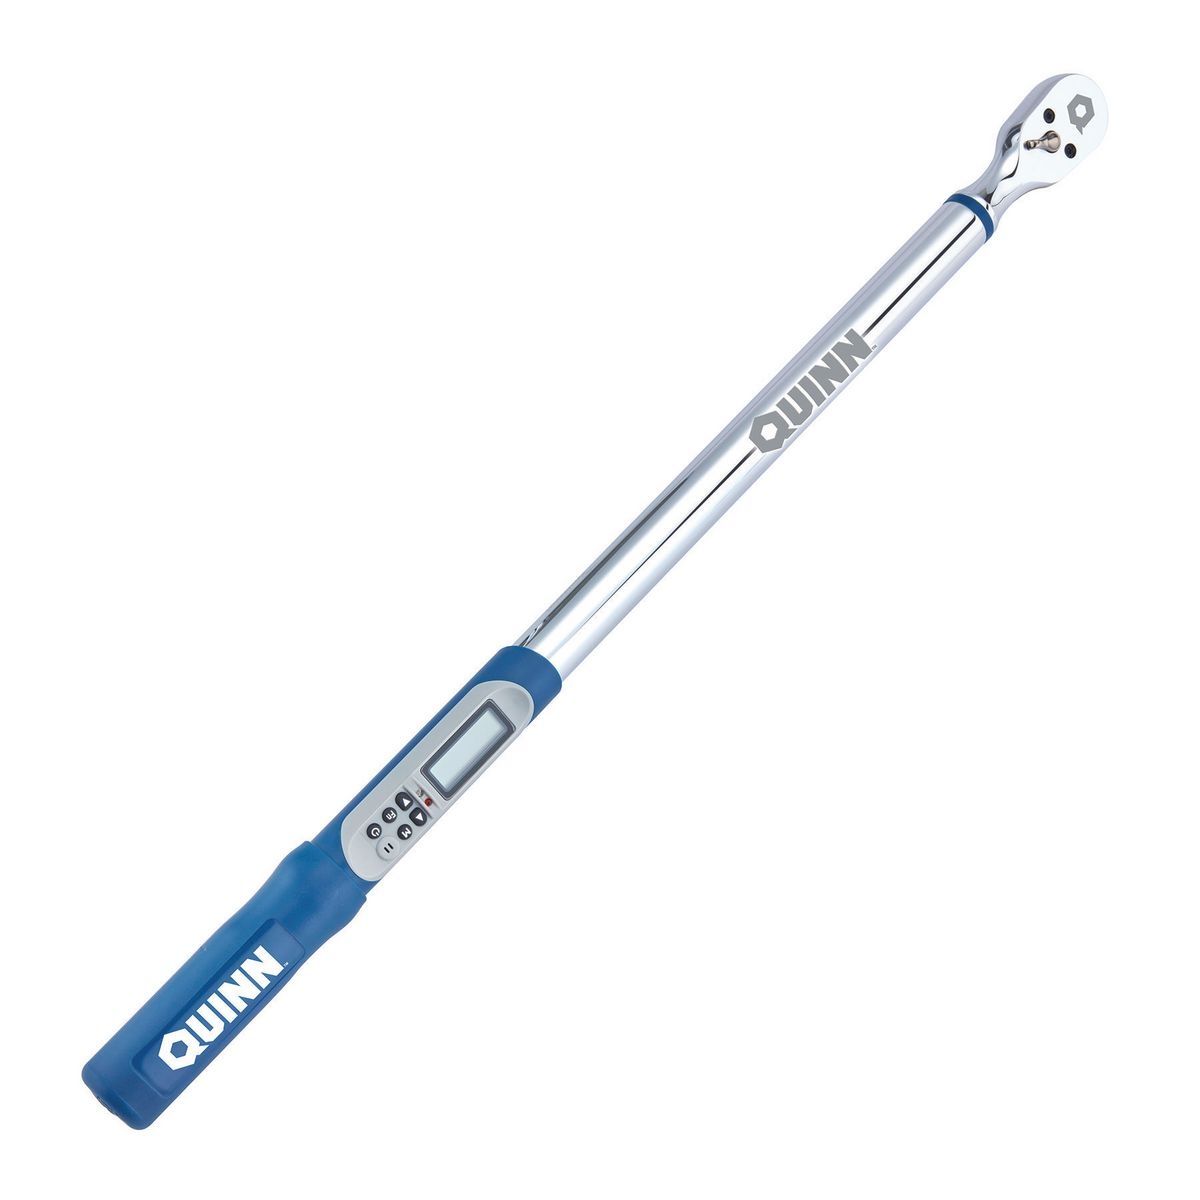 QUINN 1/2 in. Drive 12.5-250 ft. lb. Digital Angle Torque Wrench